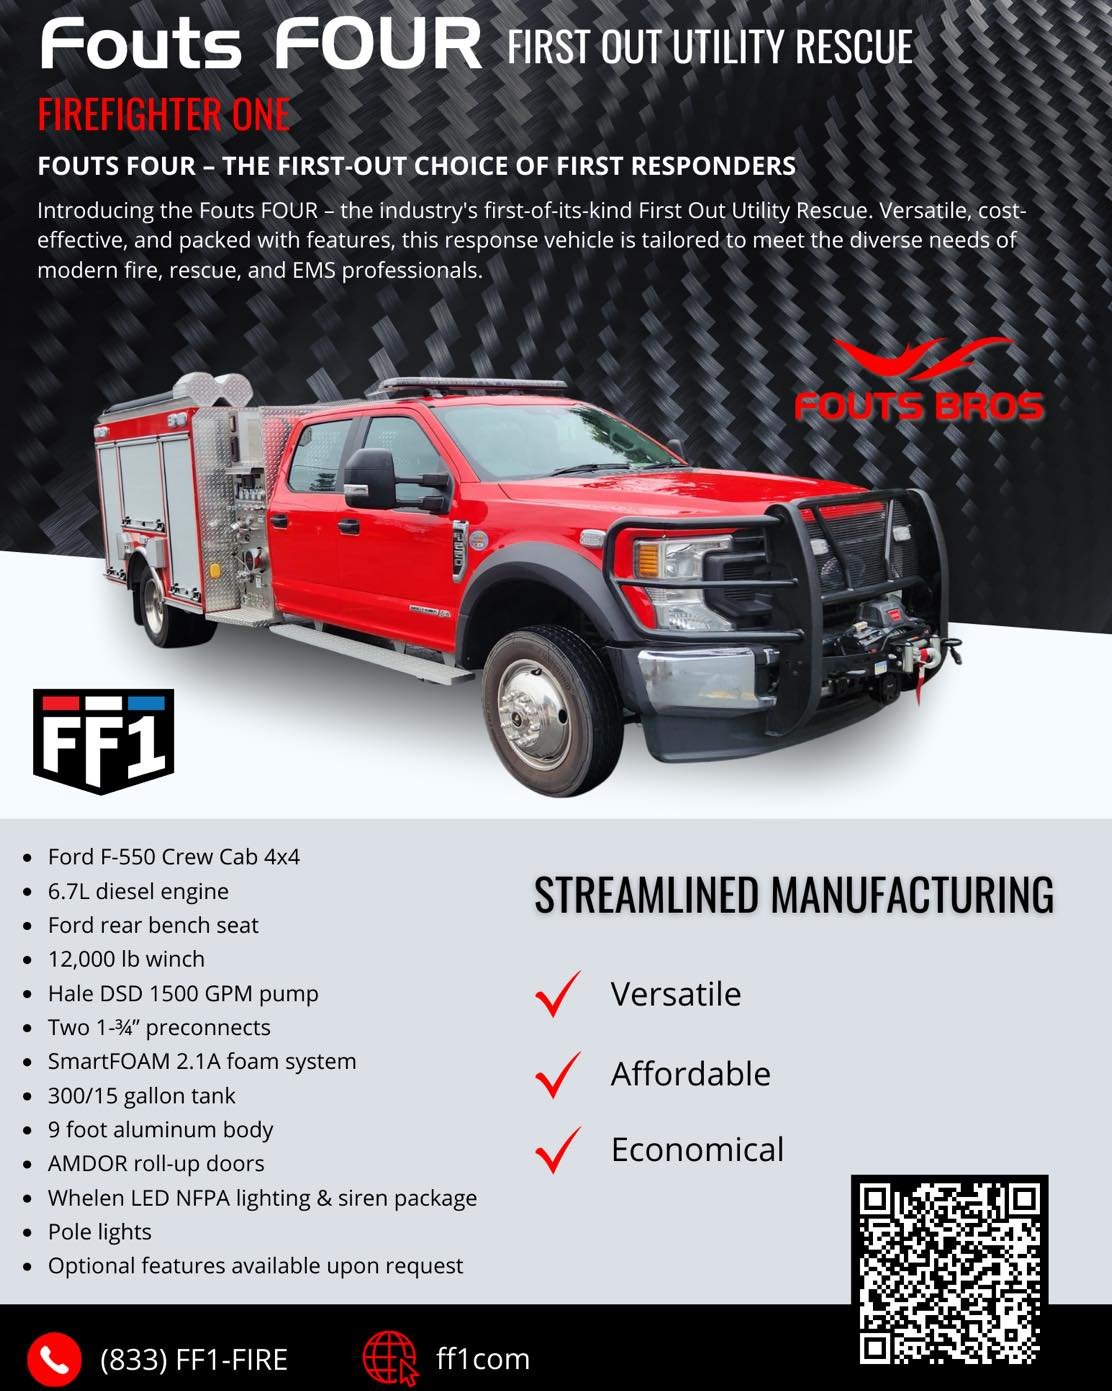 The Fouts Bros First Out Utility Rescue, otherwise known as the Fouts FOUR is available now! We are currently setting up demos for the summer with this &ldquo;ready for everything&rdquo; truck! Ready to set up your visit, Talk to us! 

@foutsbros 
#f